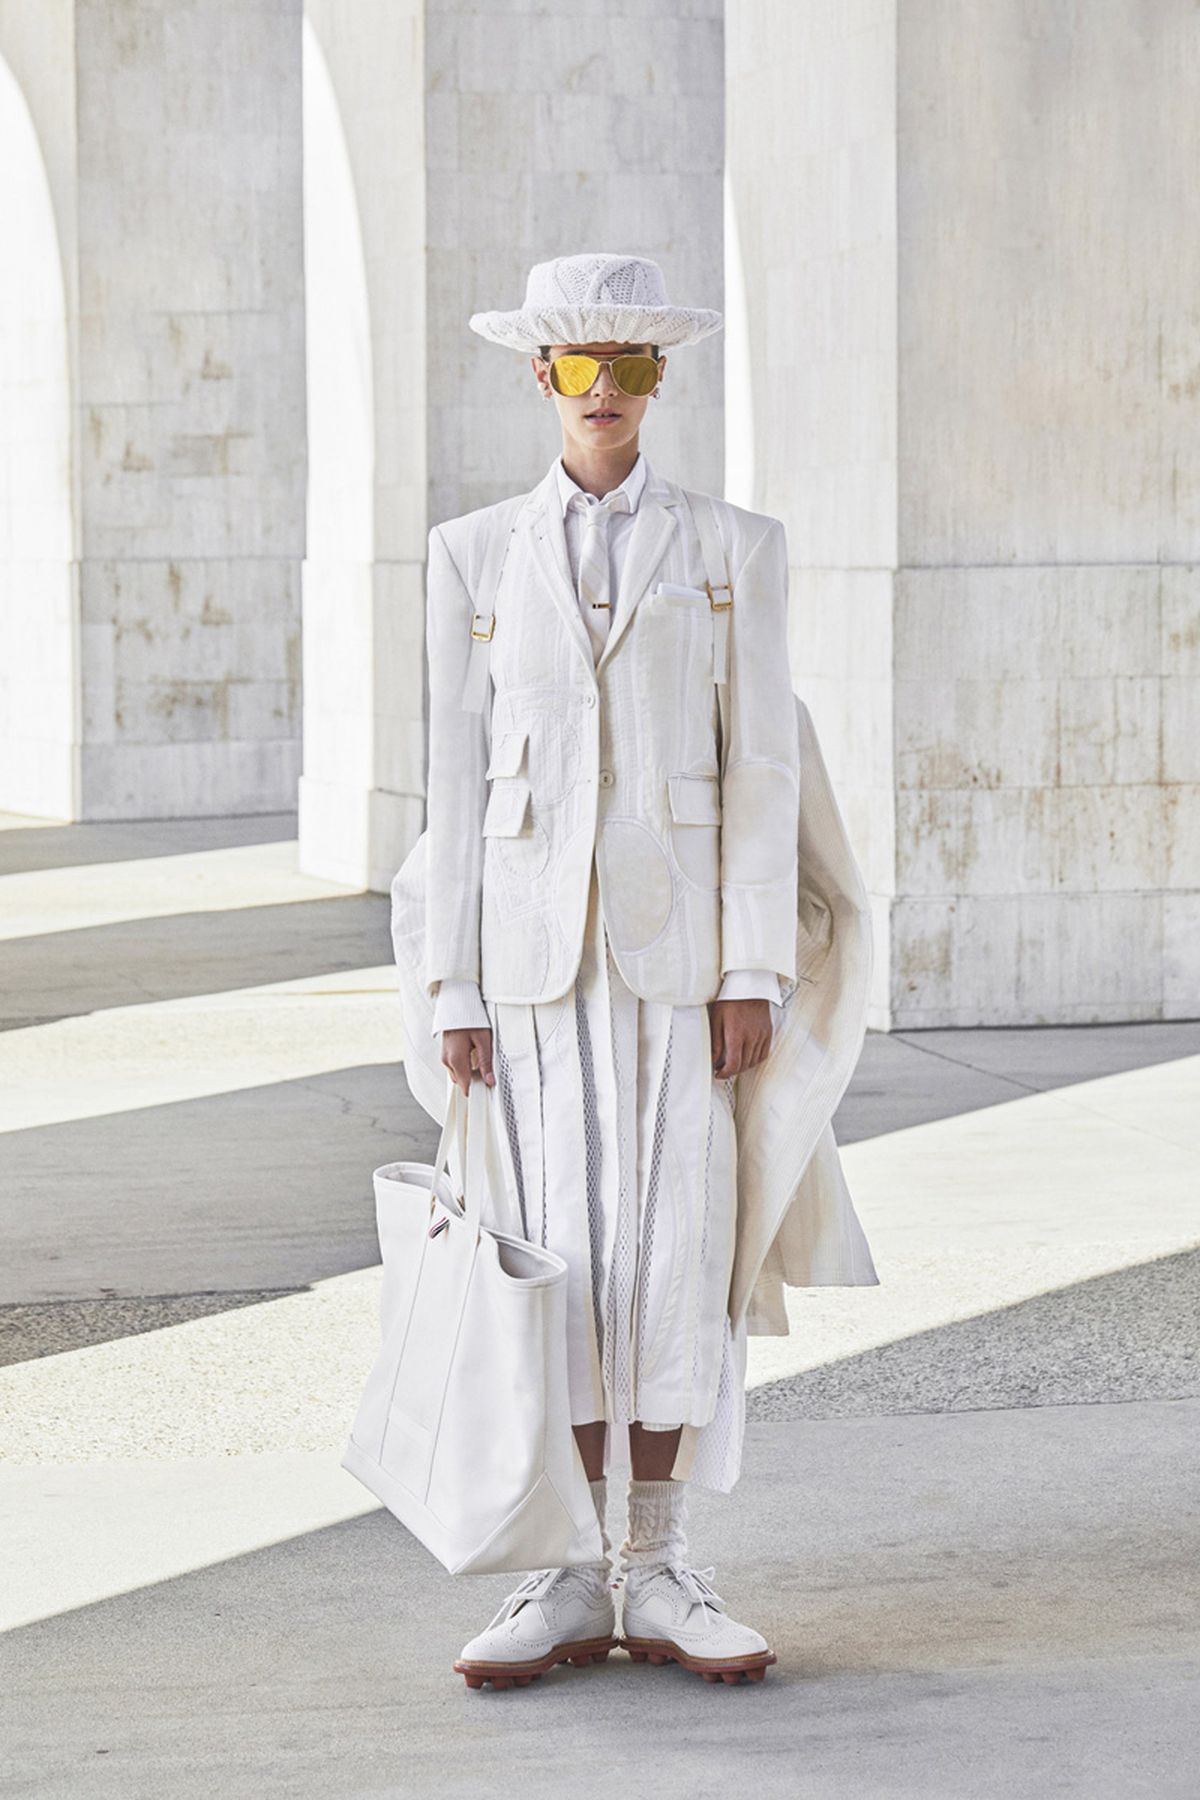 The 2020 Olympics Were Postponed, So Thom Browne Hosted His Own